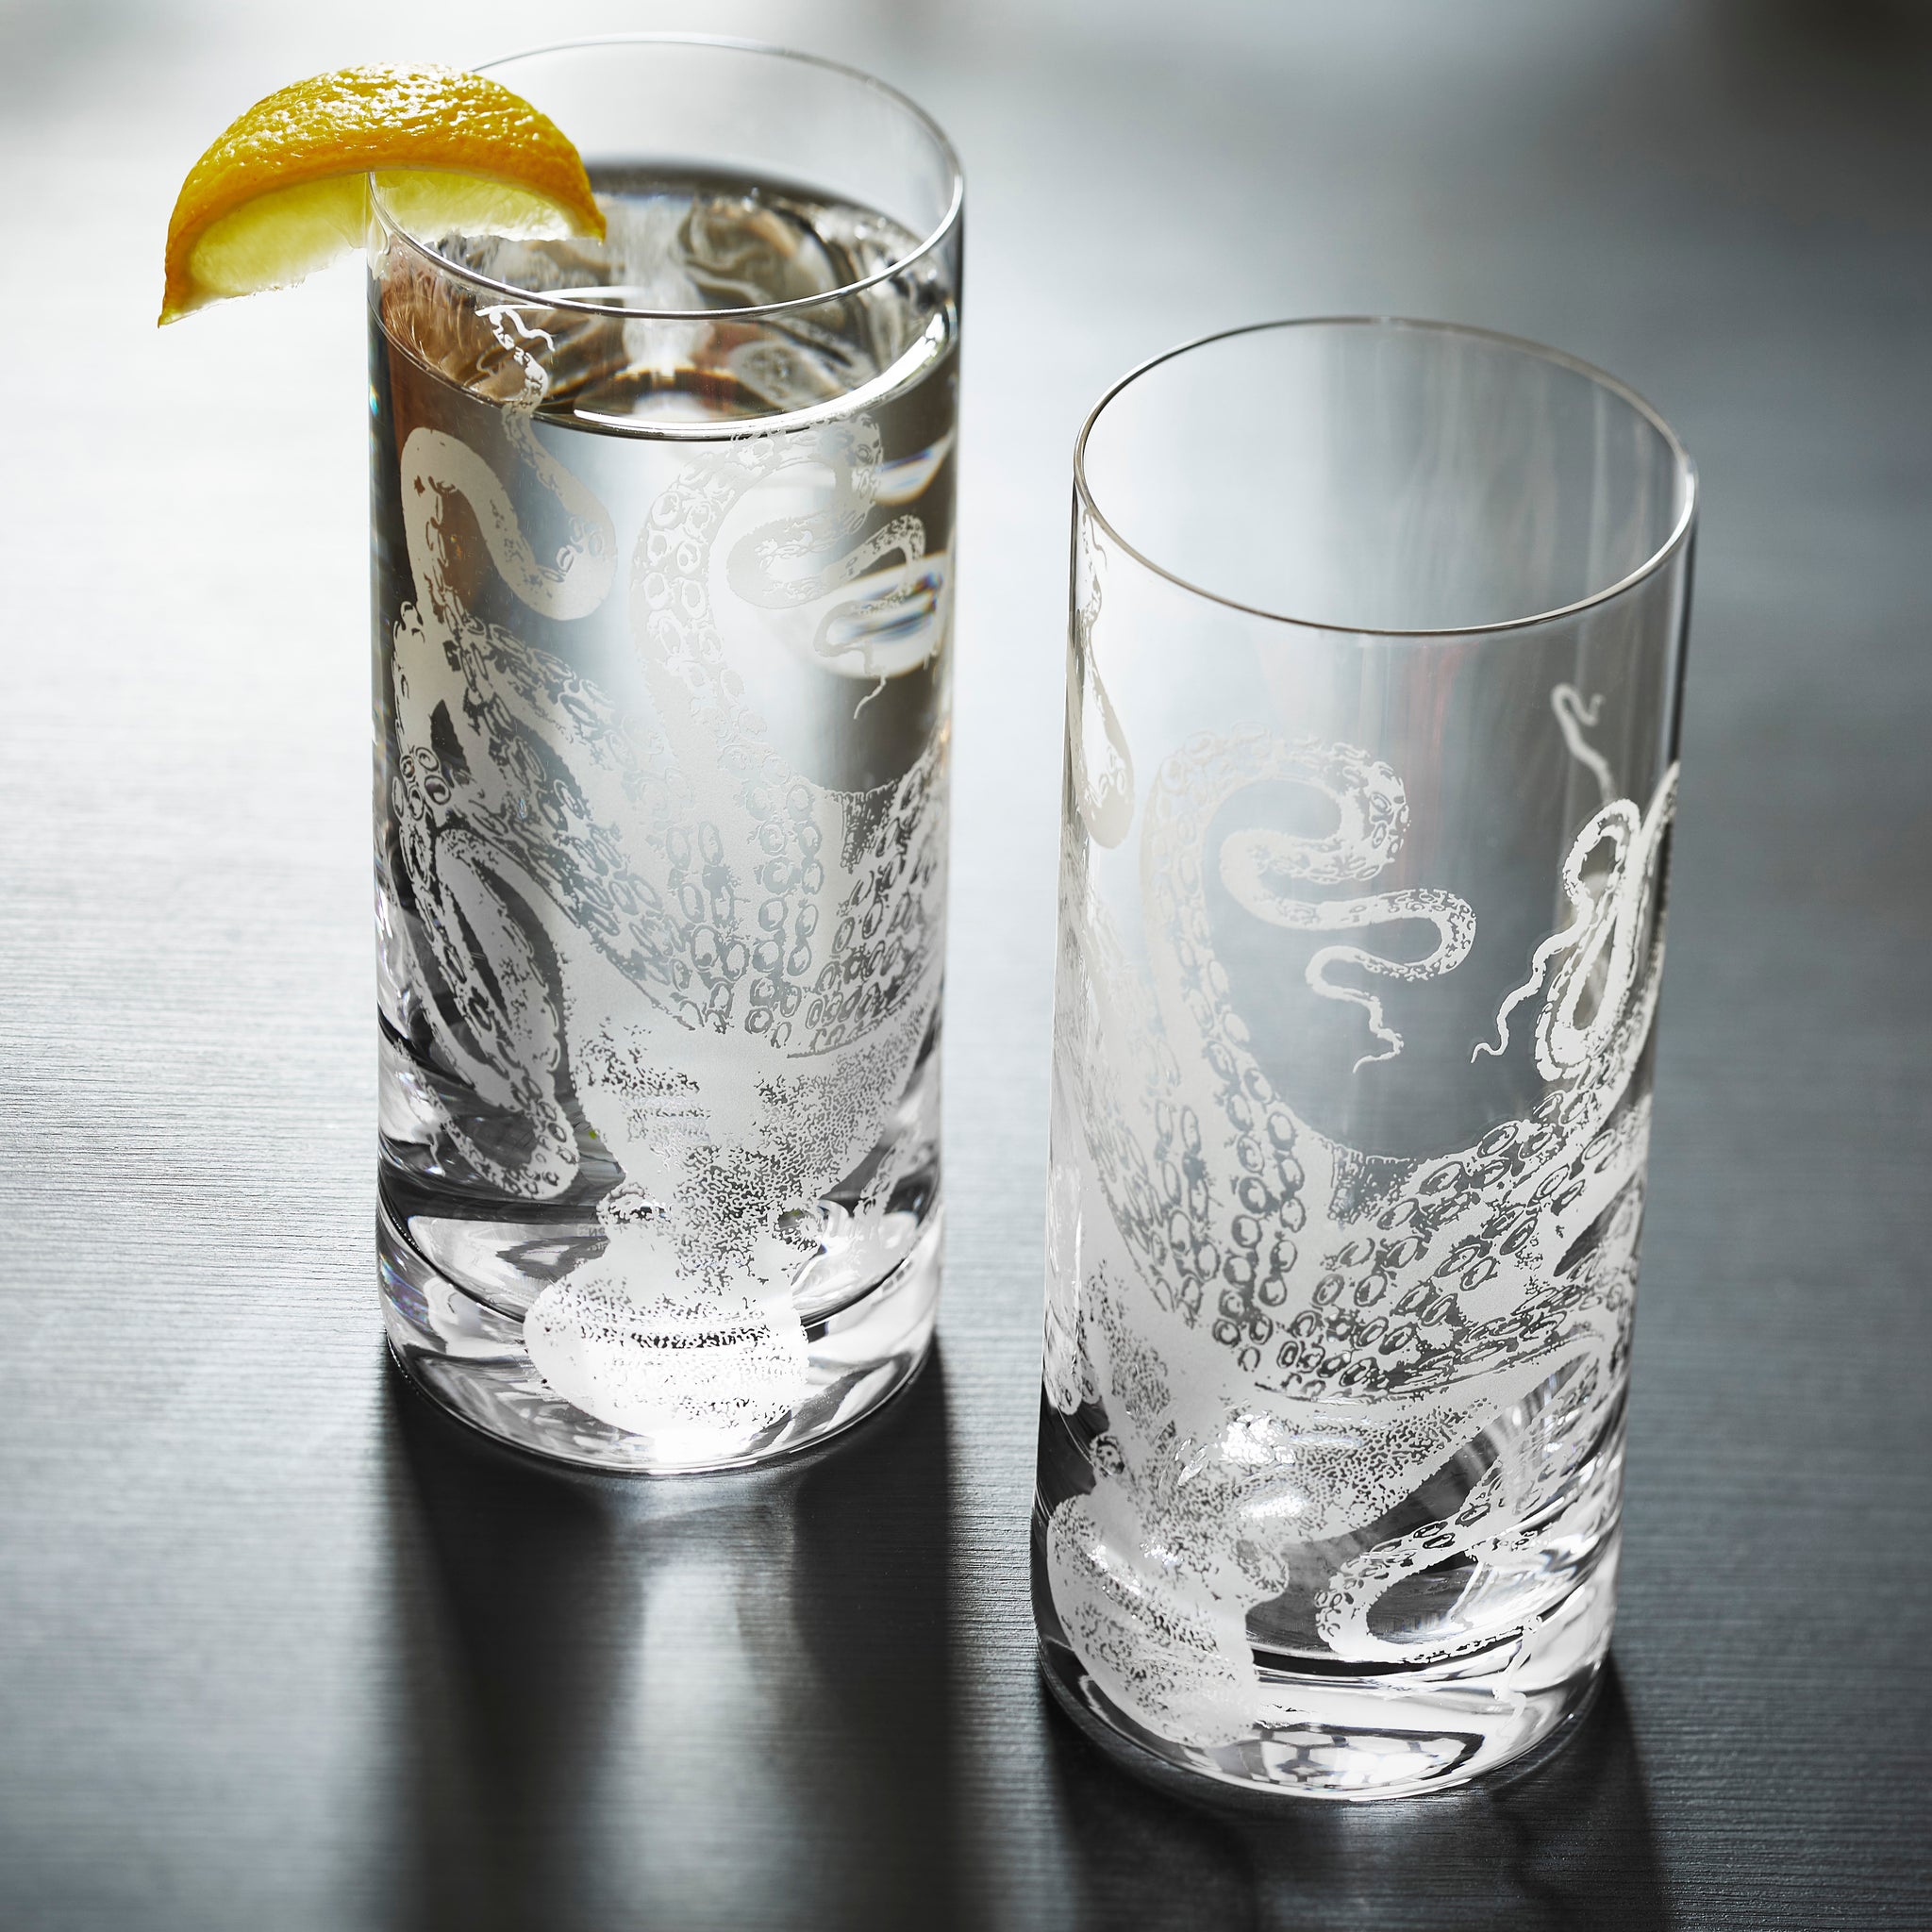 Tall Drink Crystal Glasses - Set of 2, Crystal